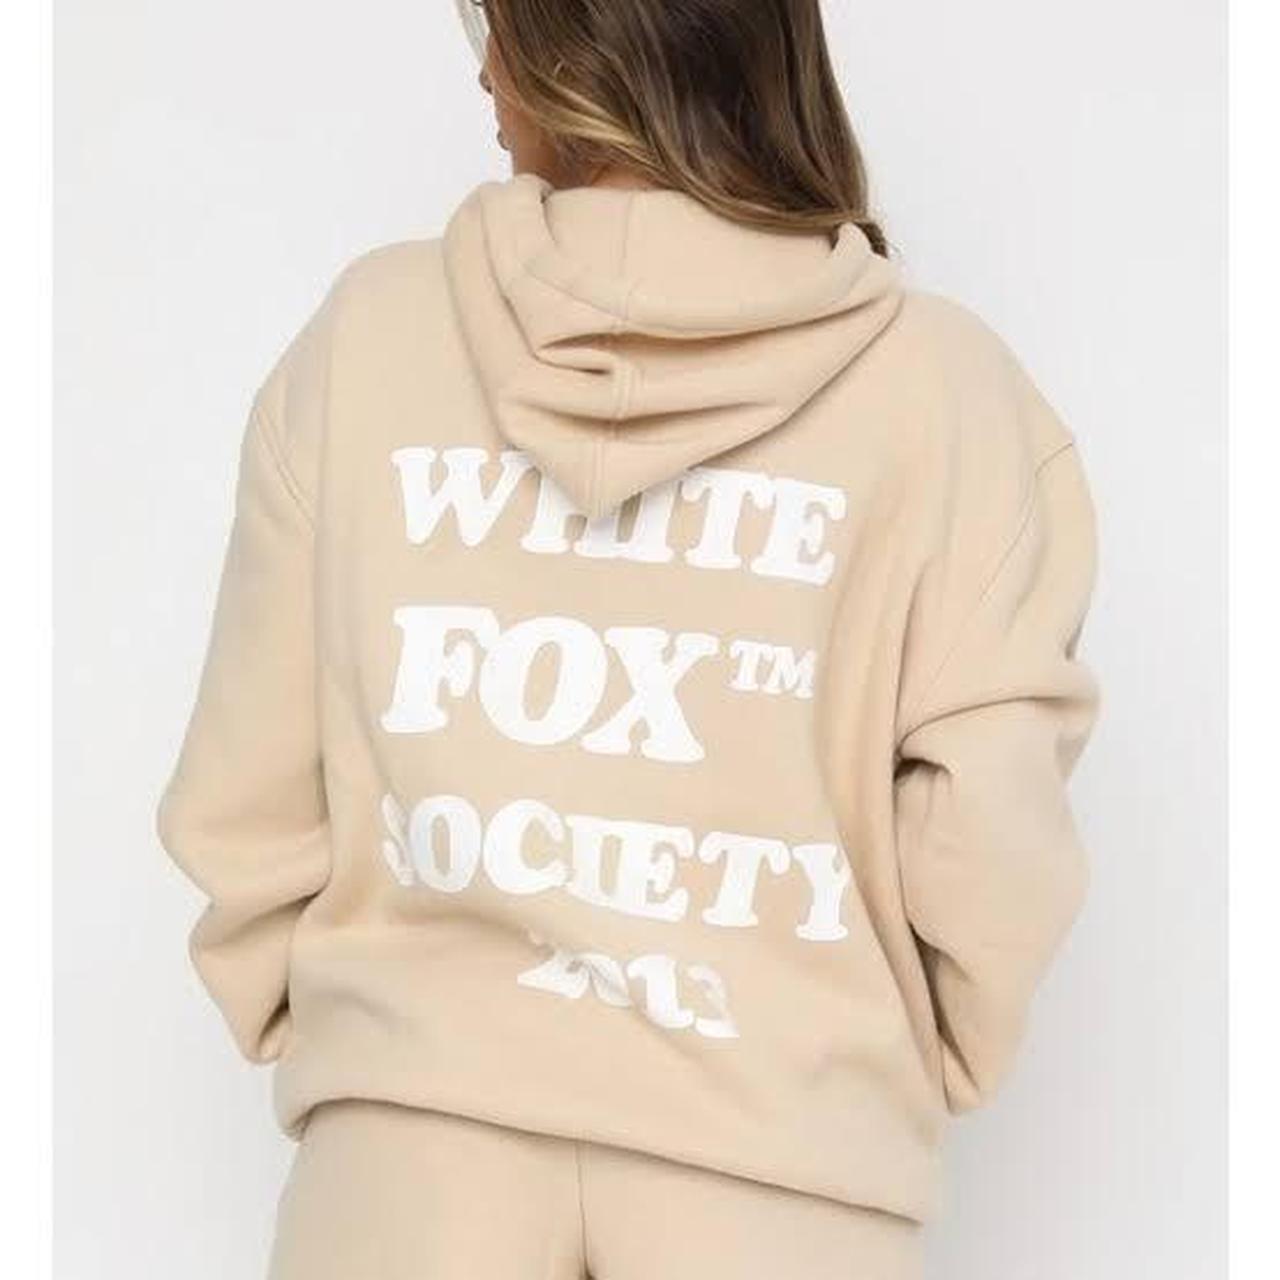 Super cosy White Fox Society hoodie Never worn by... - Depop